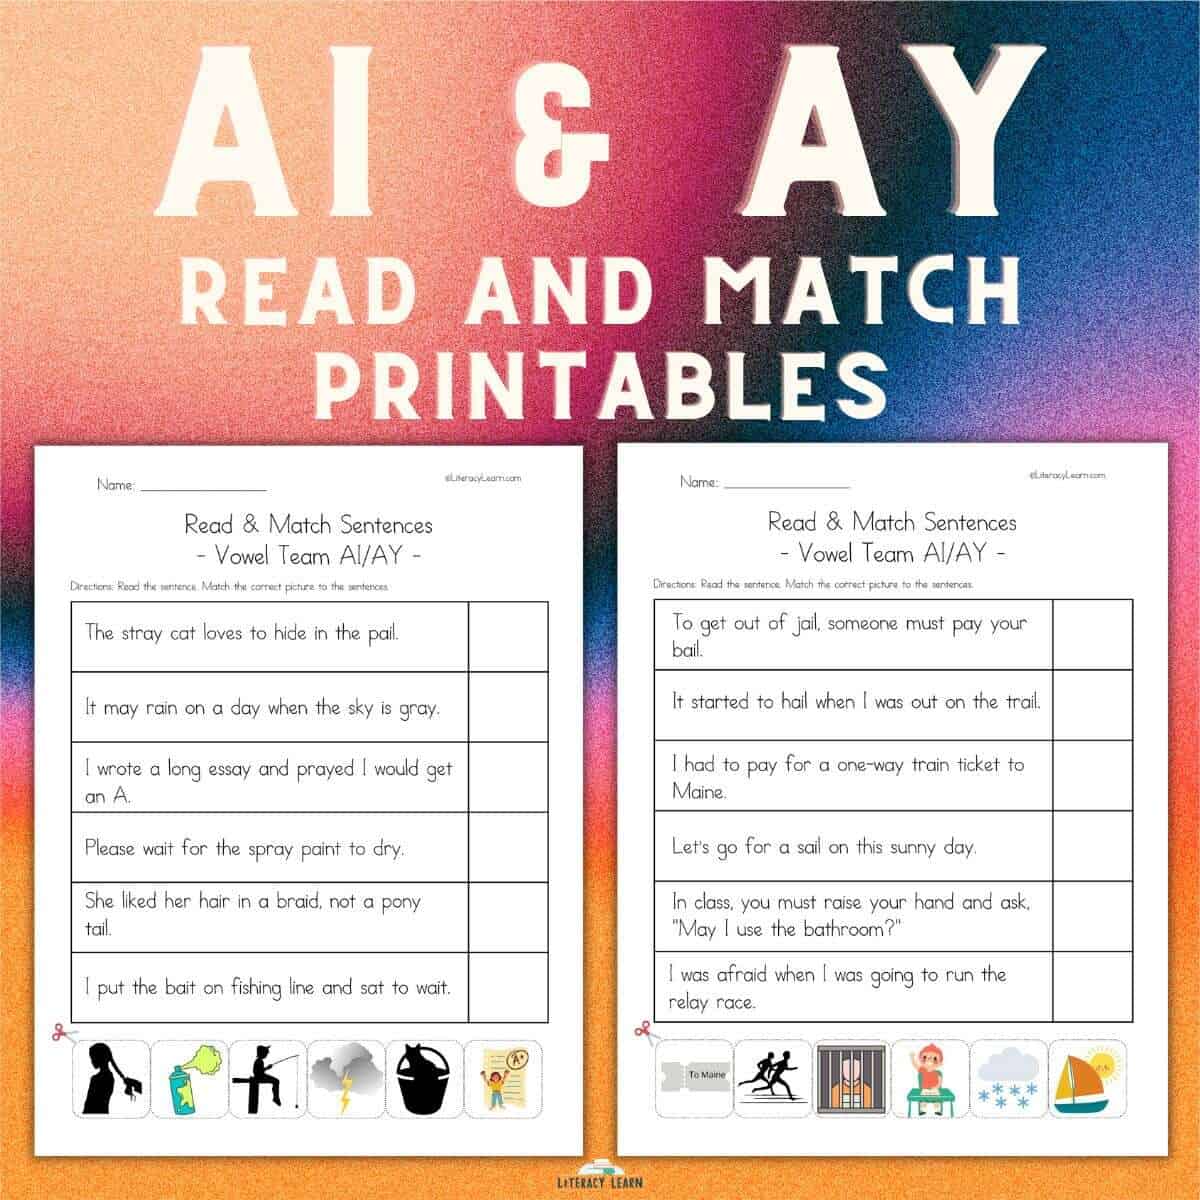 Graphic with 2 worksheets and large block letter title saying "AI and AY Words."